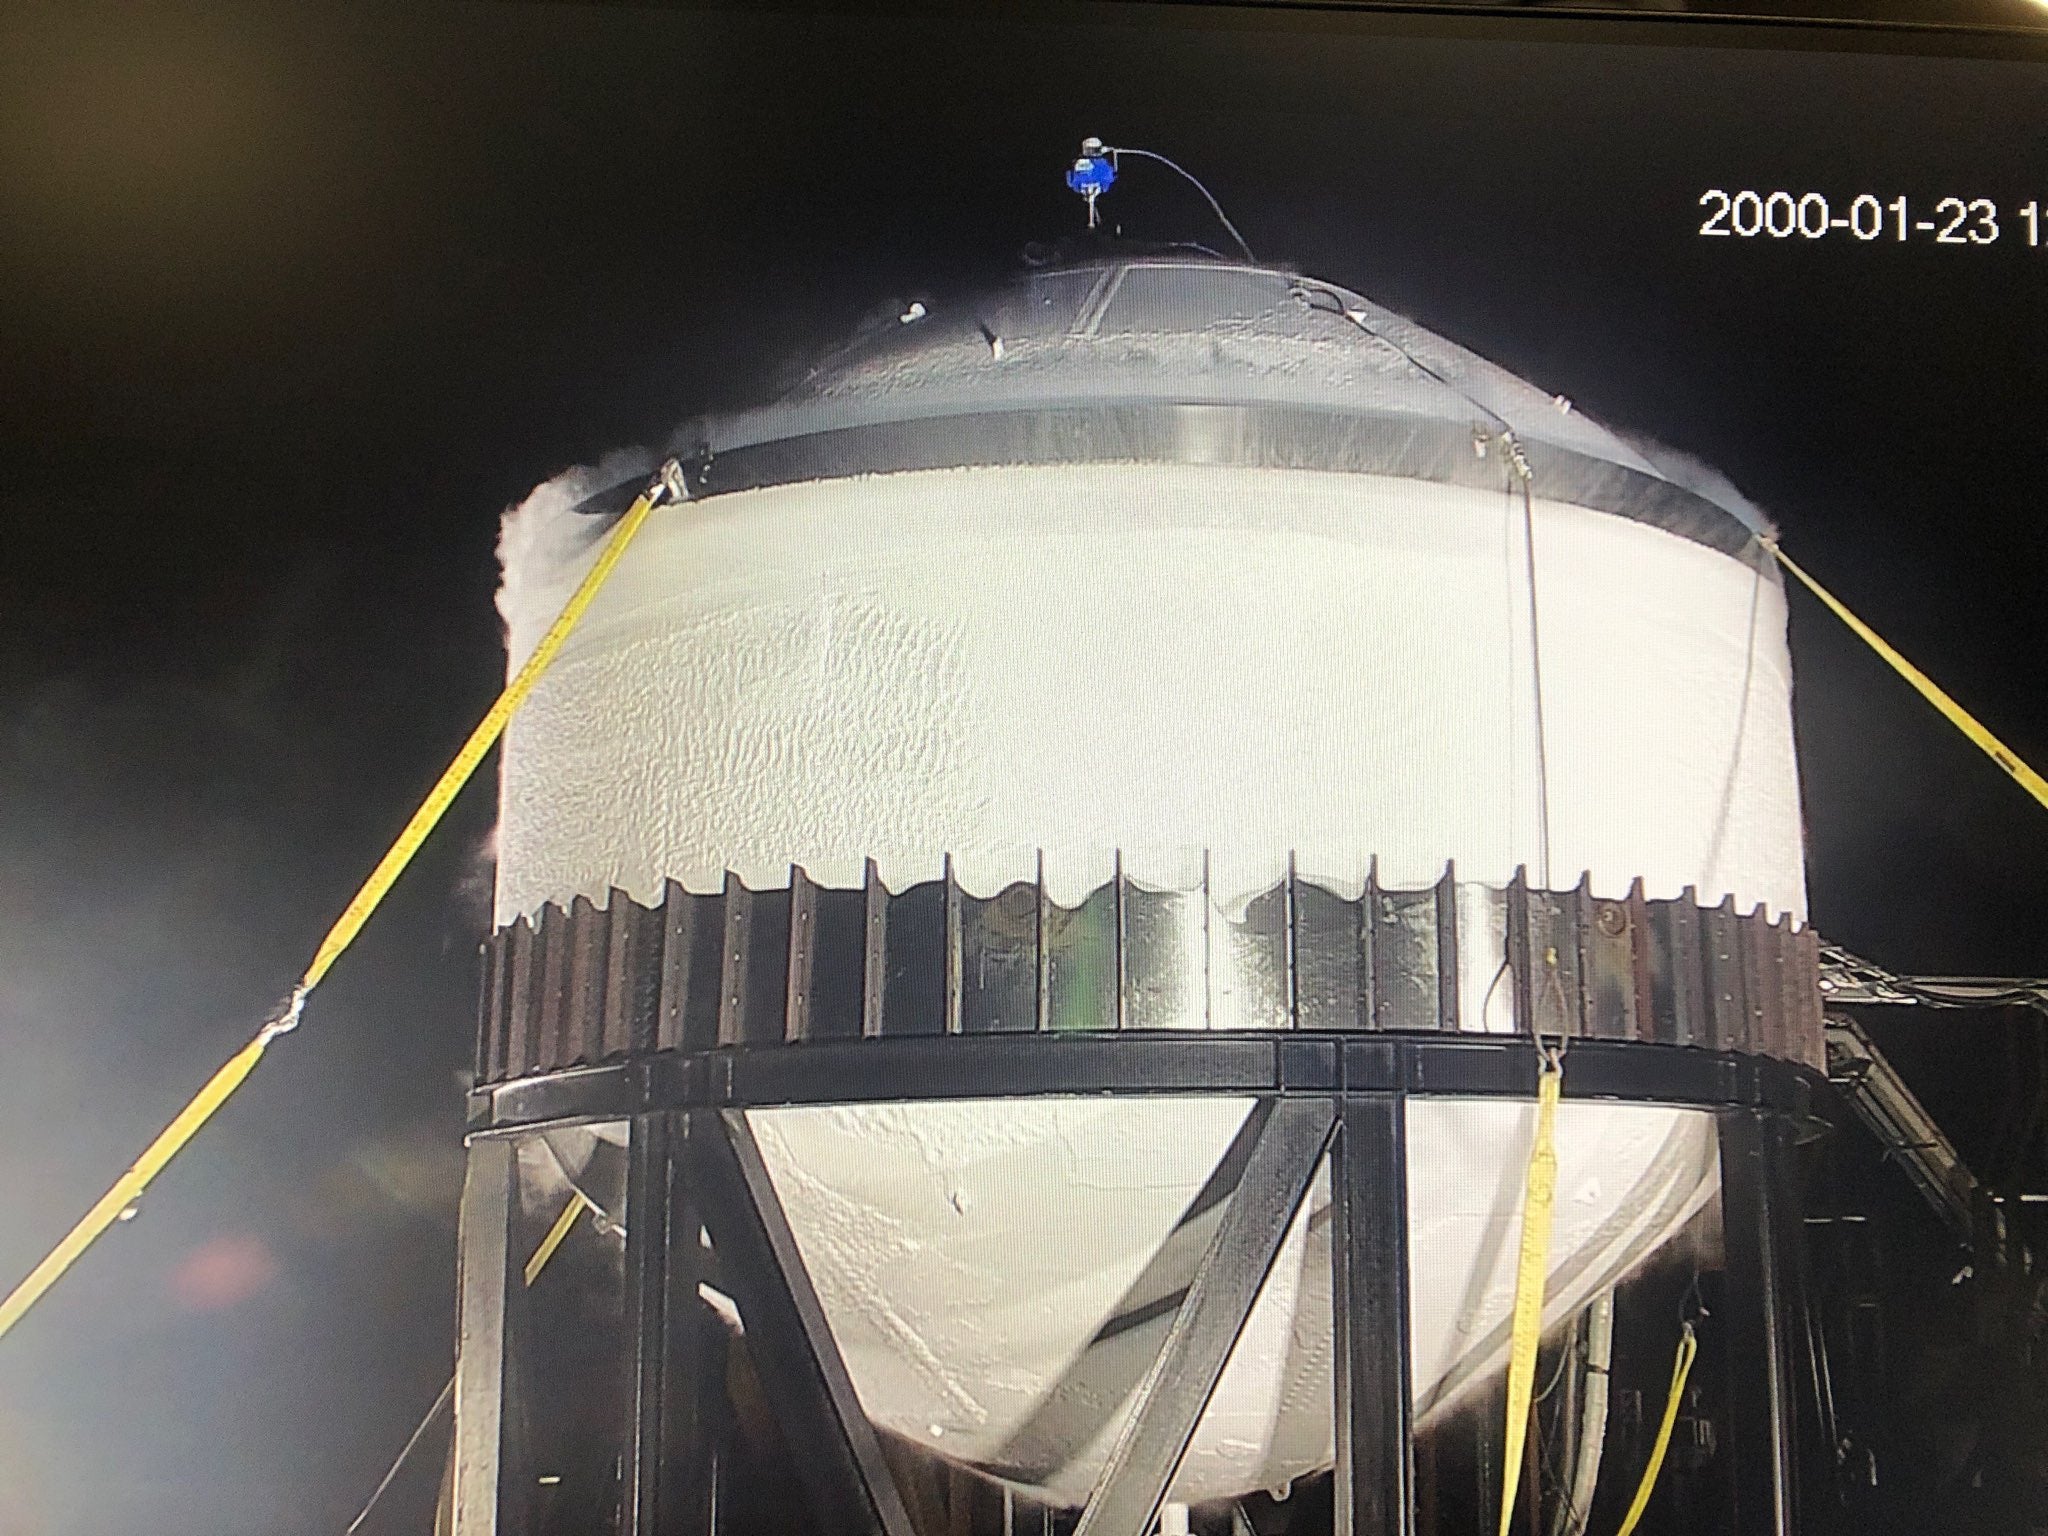 SpaceX conducts 'destructive' cryogenic strength test on a Starship dome tank at Boca Chica [VIDEO]